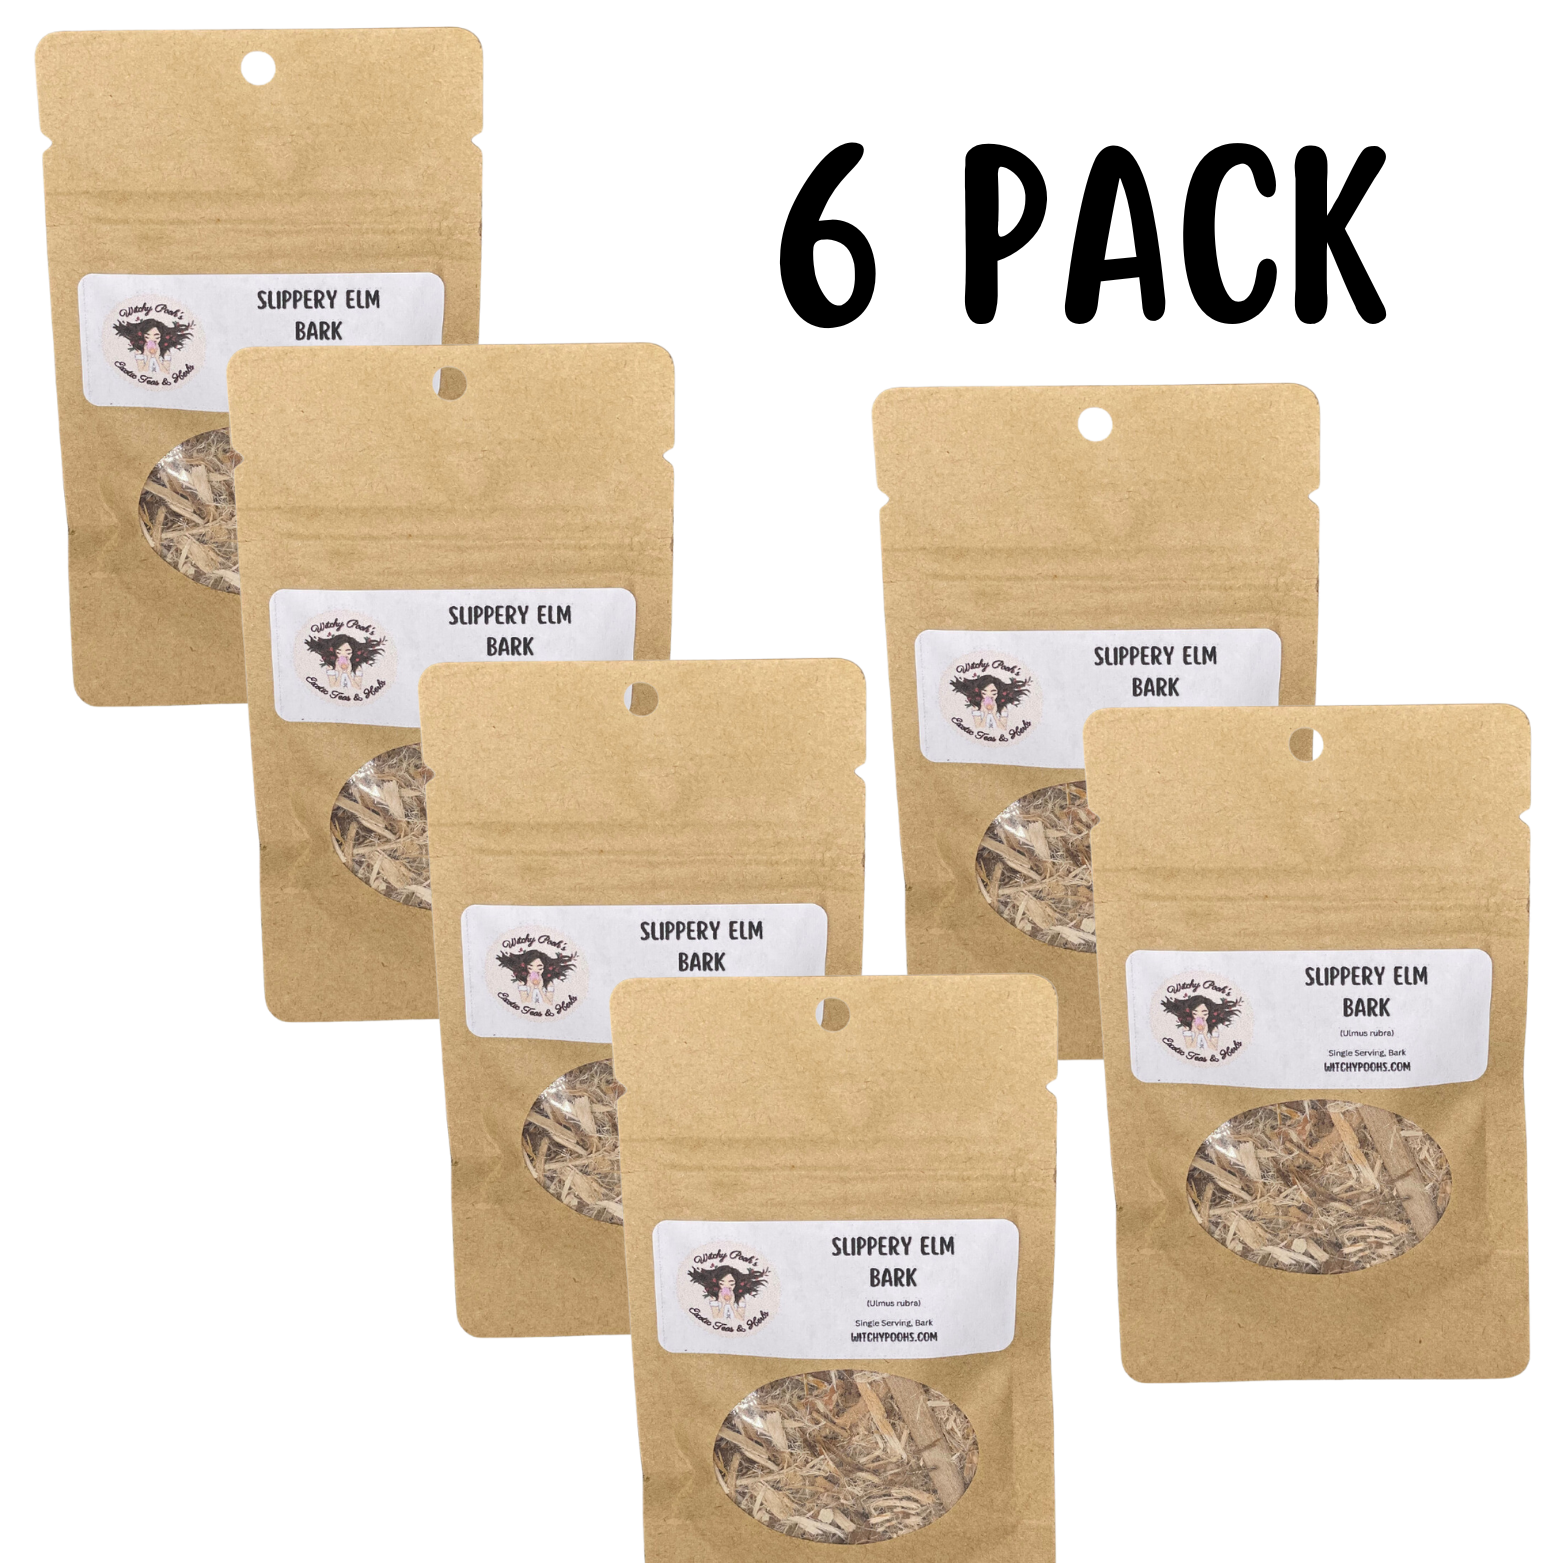 Witchy Pooh's Slippery Elm Bark For Ritual to Stop Rumor Spreading-3